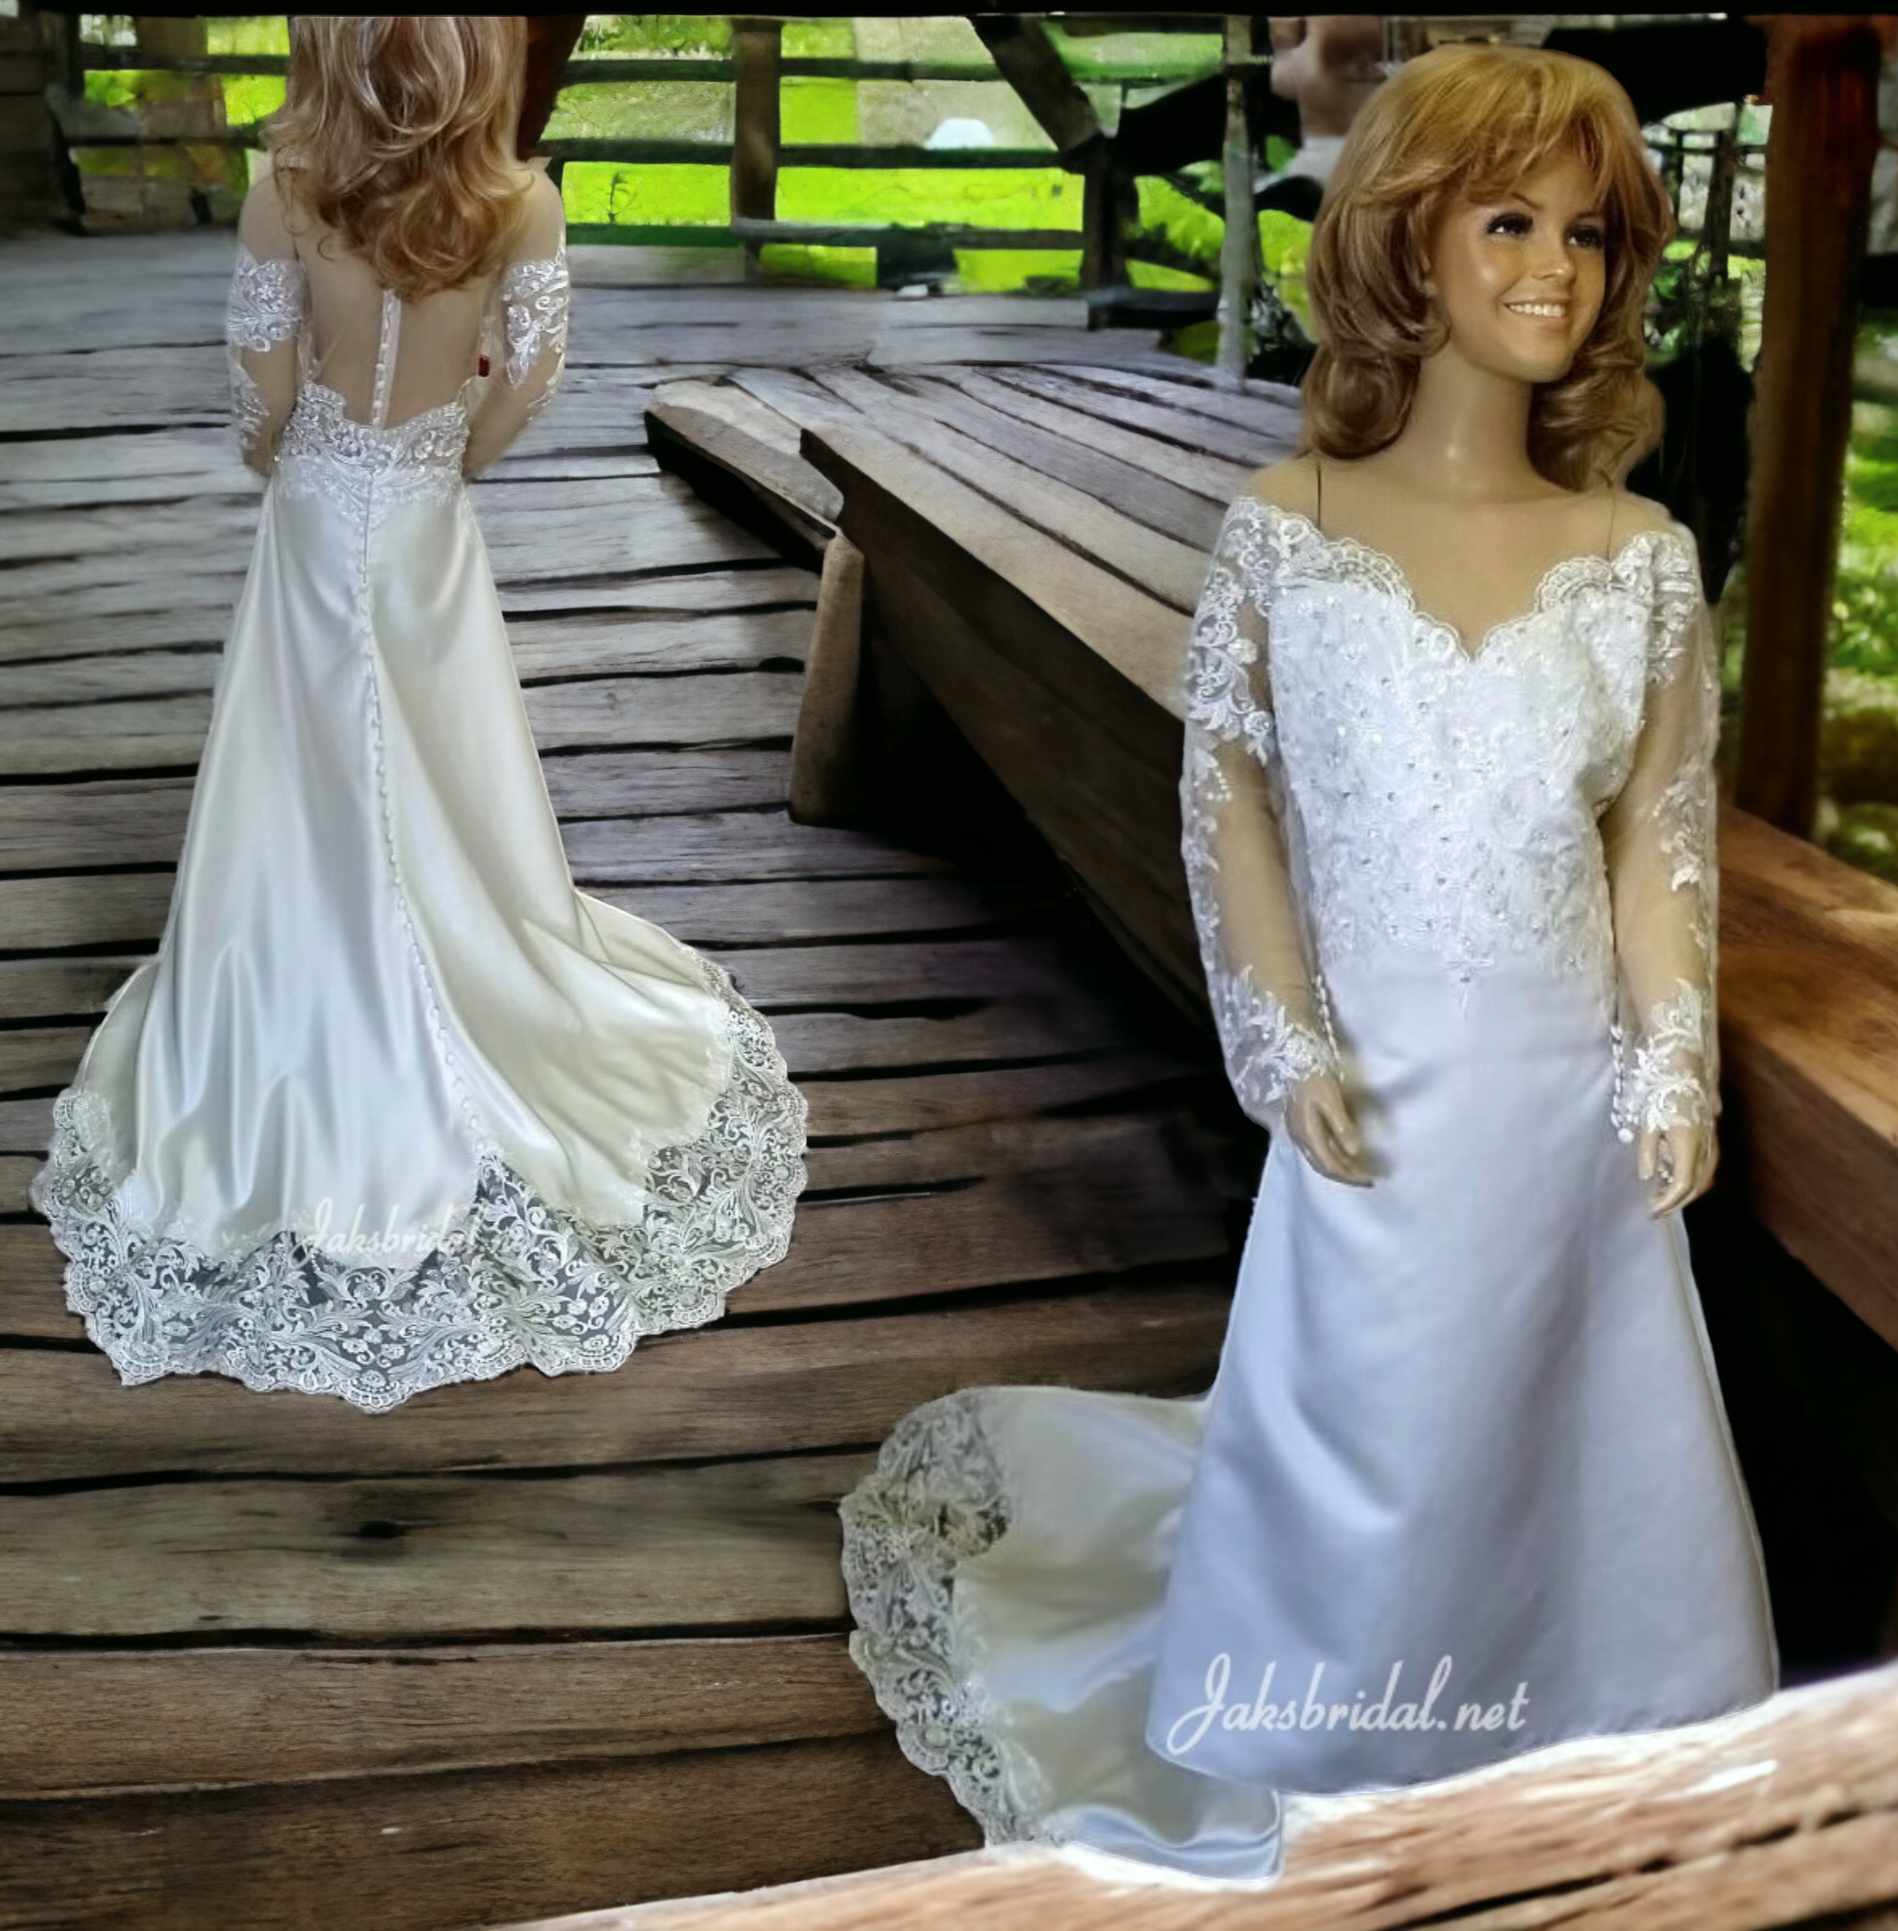 Sheer Illusion back miniature wedding dress with sleeves